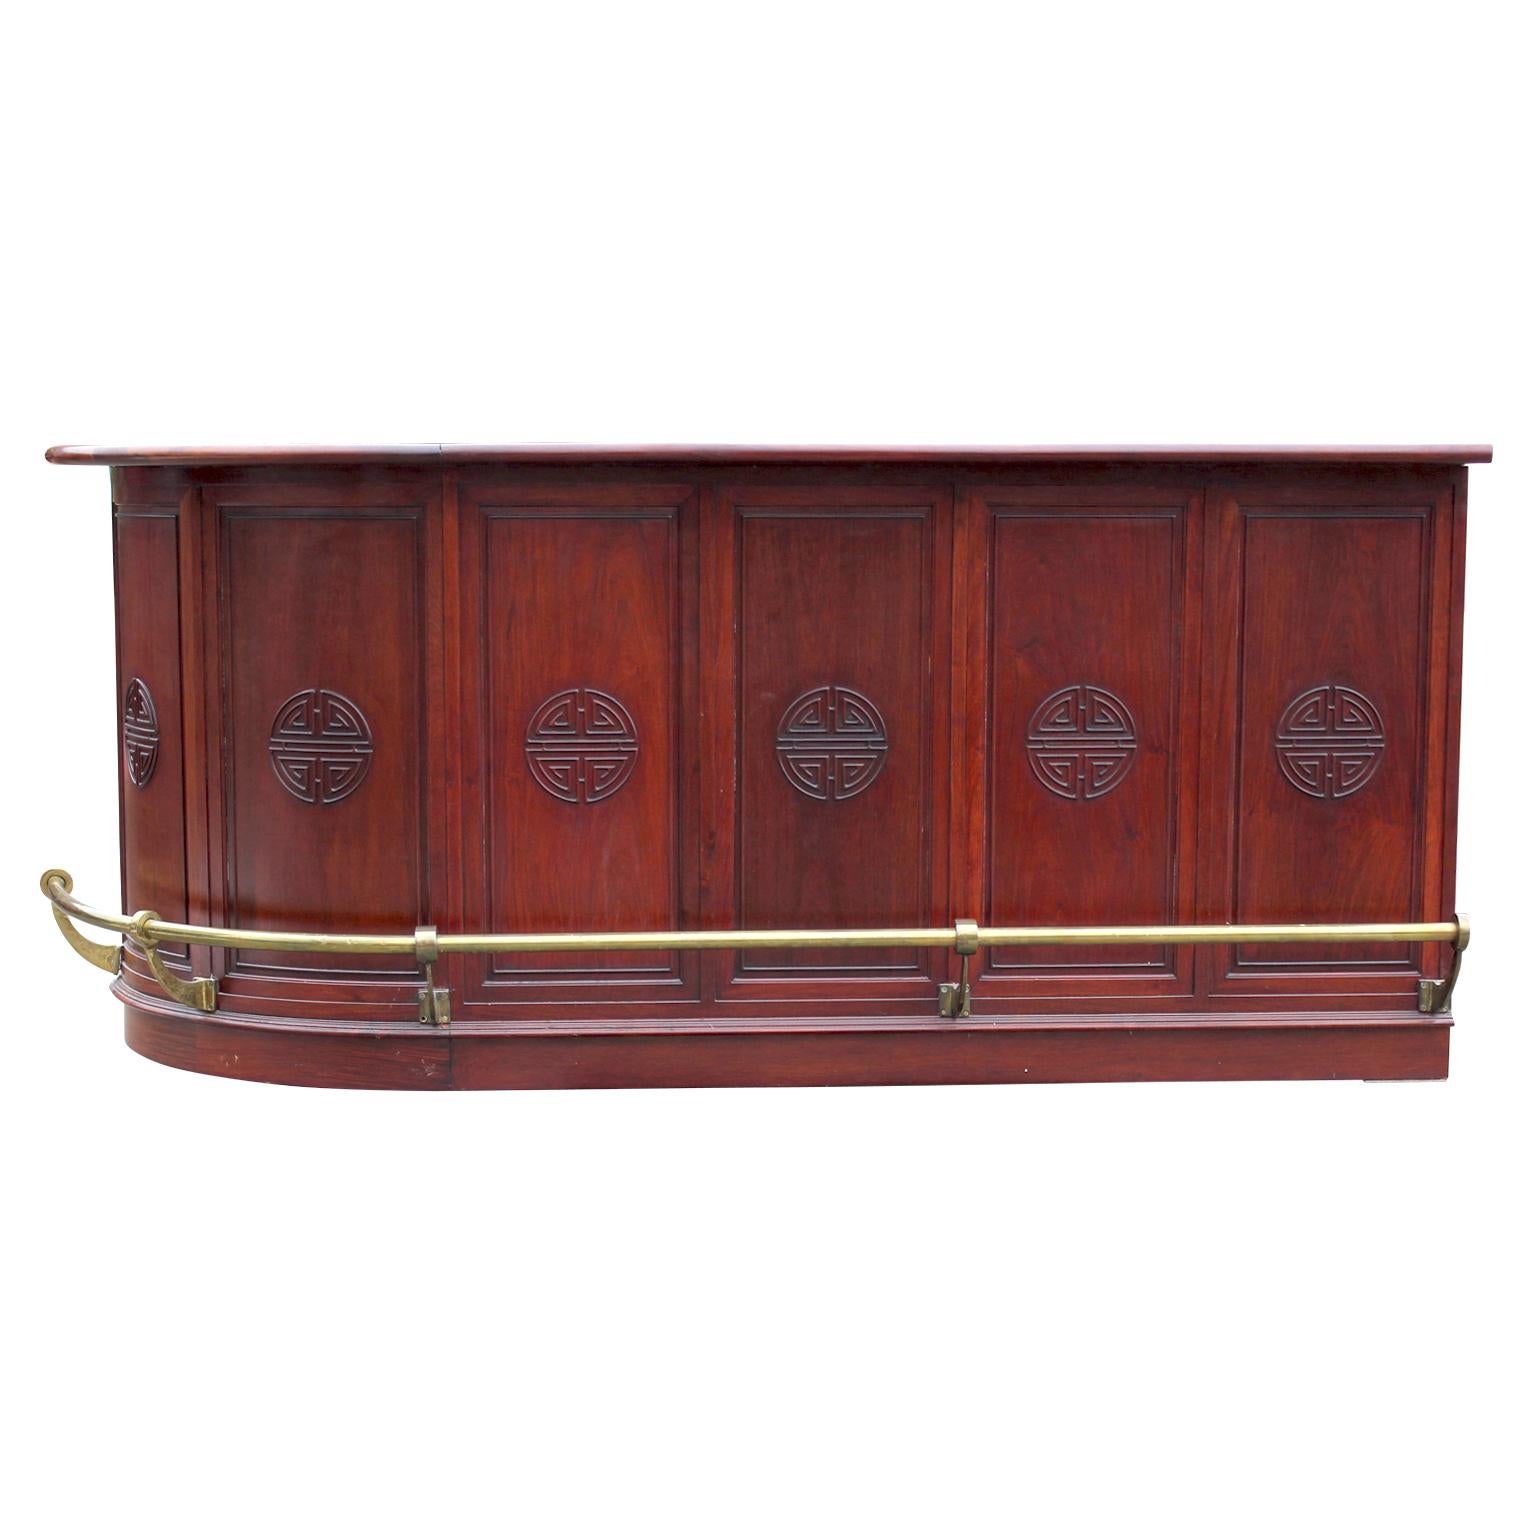 Beautiful large modern rosewood chinoiserie counter serving bar with brass detailing and plenty of storage. The right cabinet opens to reveal a single shelf. Other shelving can be seen in the photos.